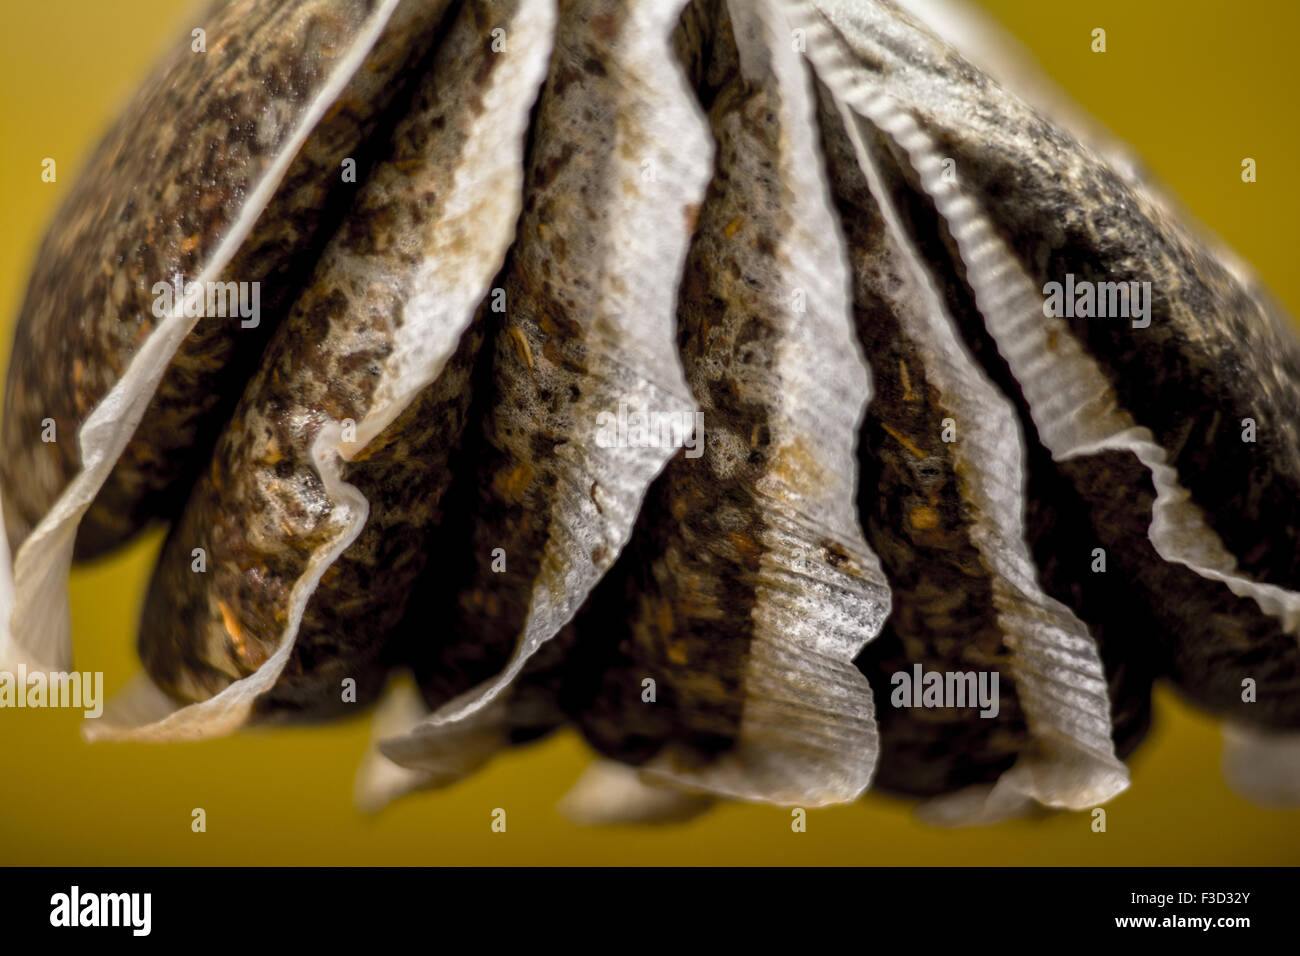 Group of teabags on a mustard background Stock Photo